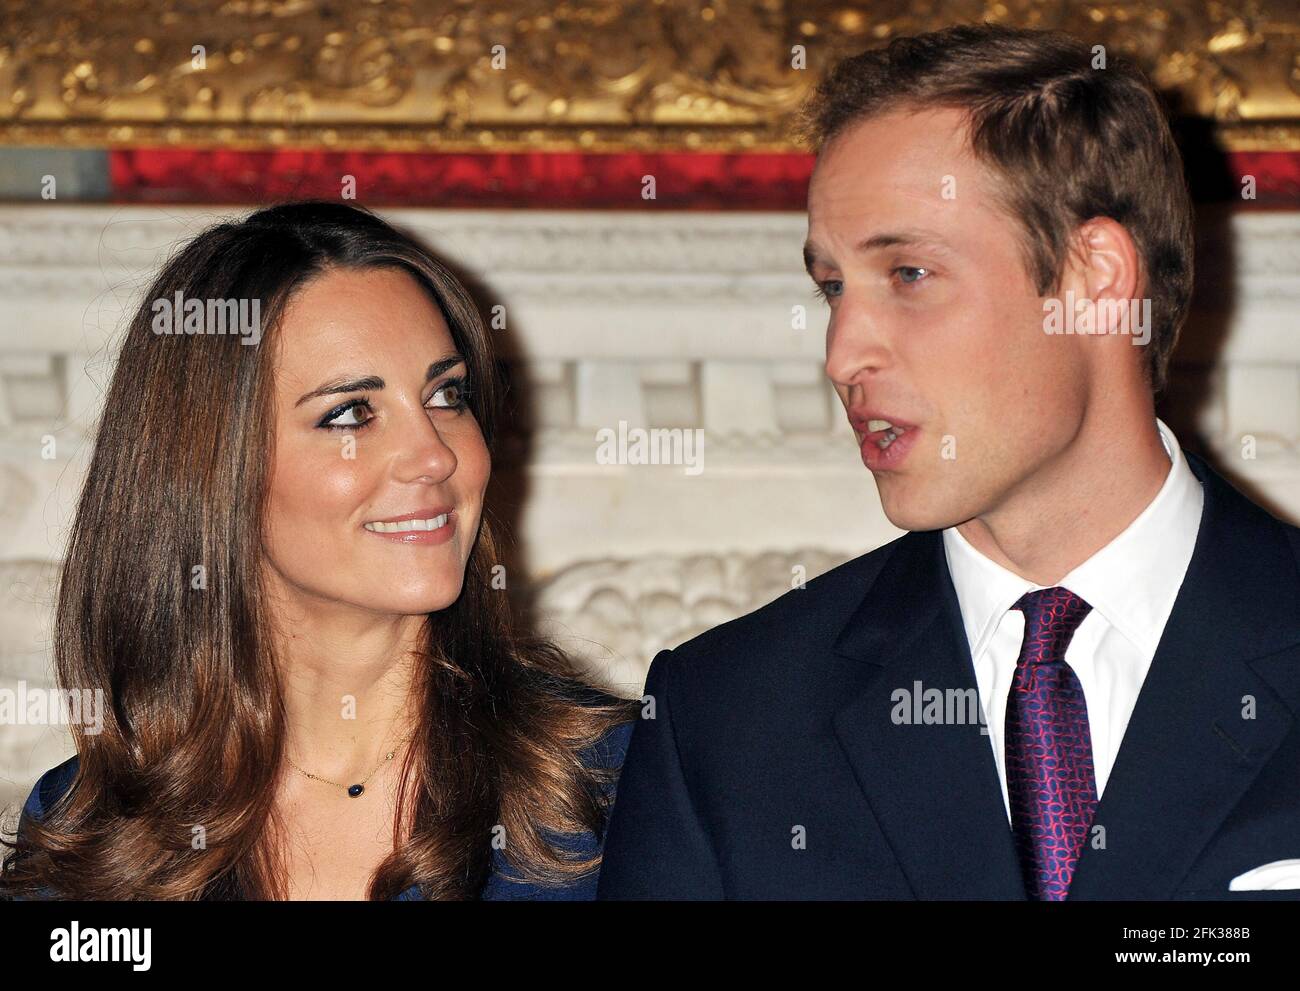 File photo dated 16/11/10 of the Duke and Duchess of Cambridge during a  photocall in the State Apartments of St James's Palace, London to mark  their engagement. University student Kate Middleton first